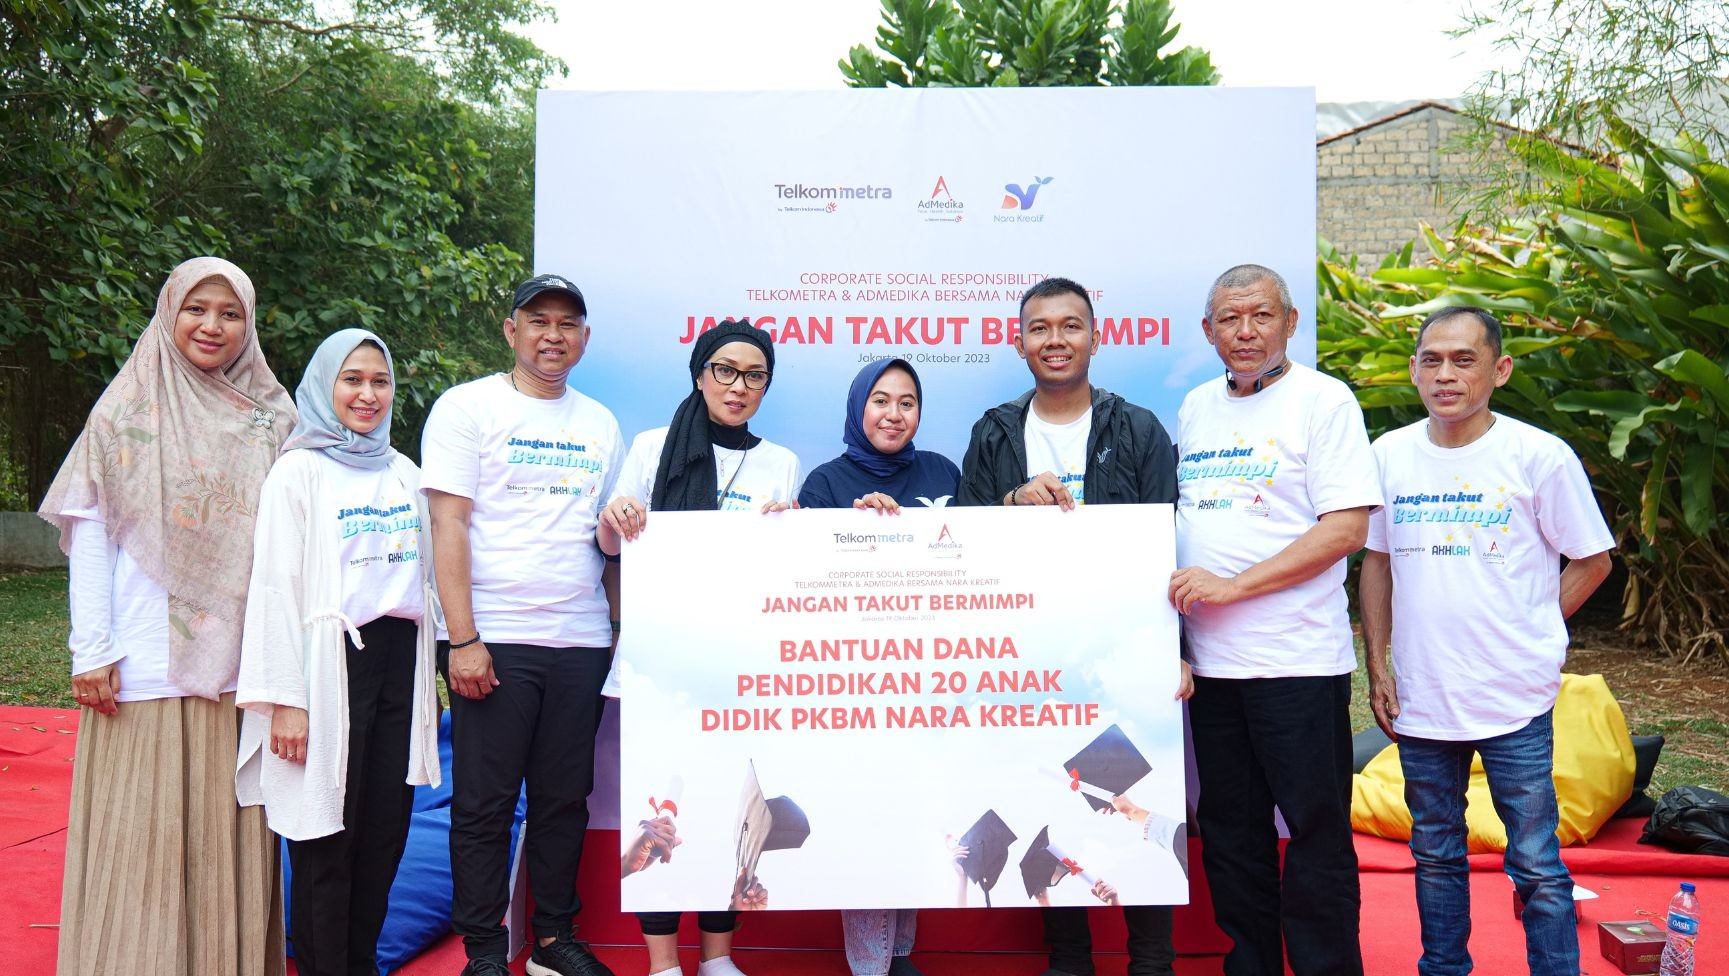 Supporting the Education of Out-of-School Children, AdMedika and TelkomMetra Collaborate with PKBM Nara Kreatif